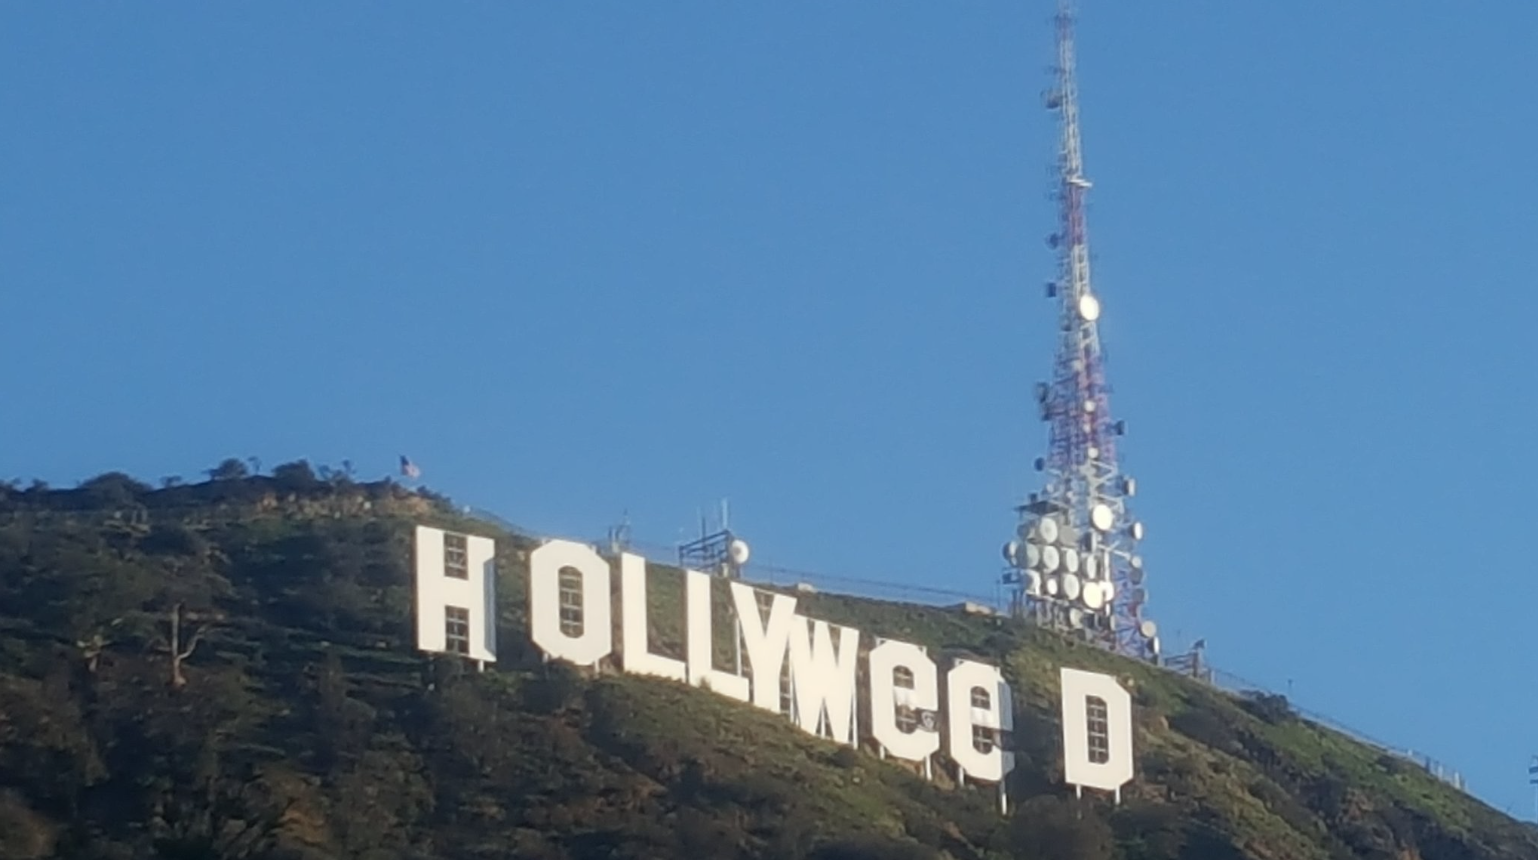 Impressive Prankster Changed Hollywood Sign To Read: Hollyweed